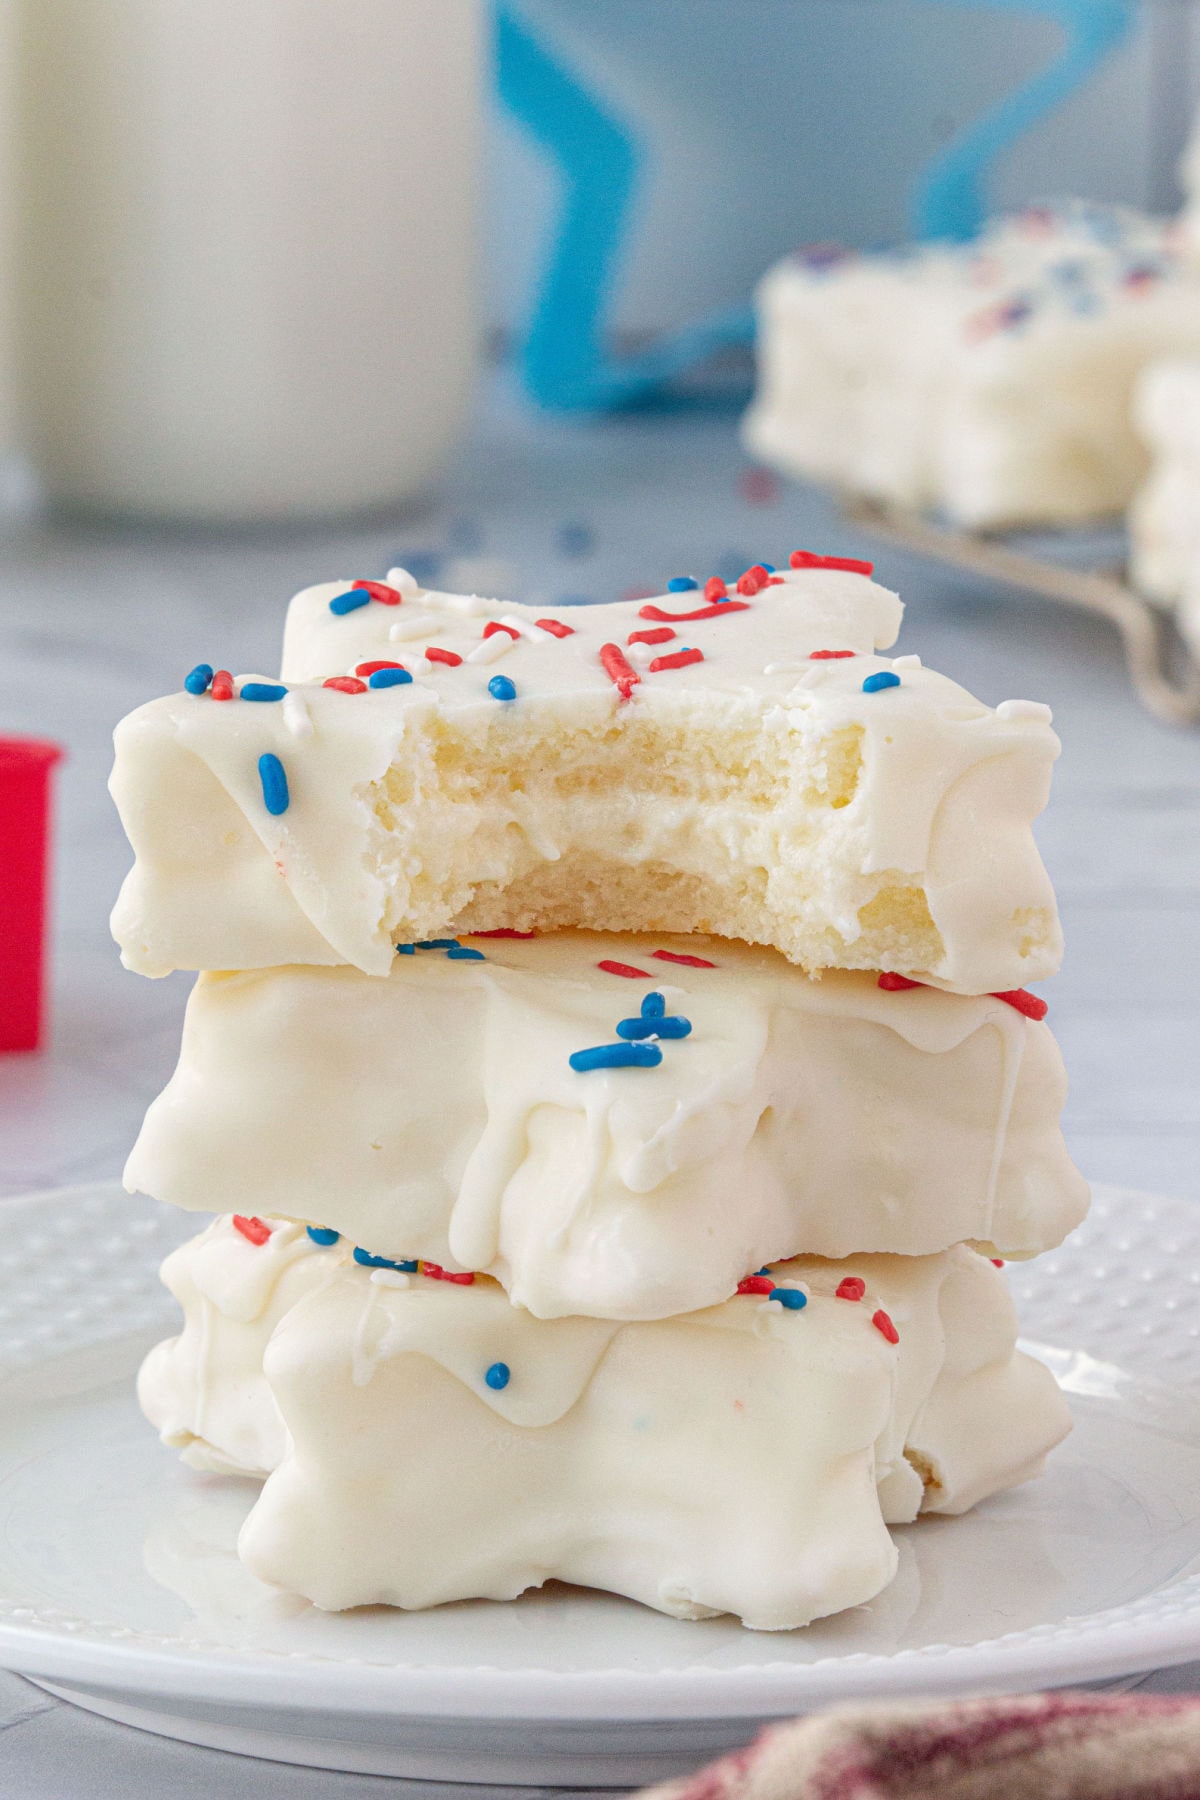 A stack of snack cakes cut in star shapes and decorated for the 4th of July.